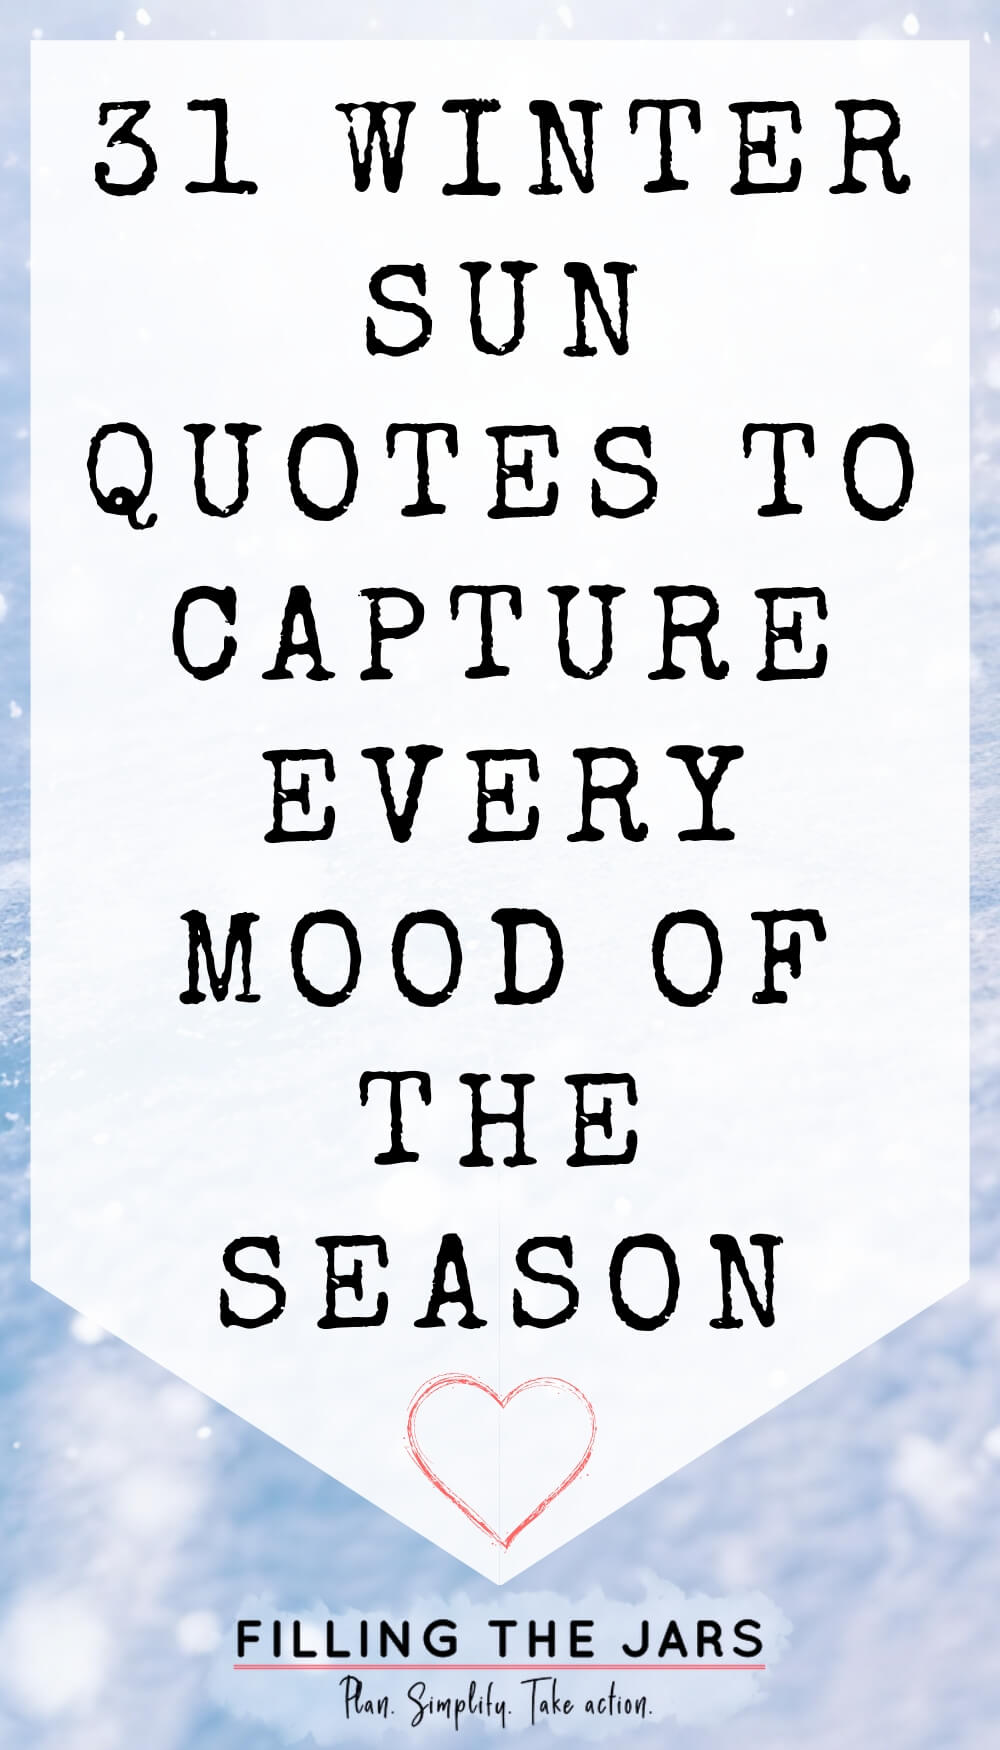 Text 31 winter sun quotes to capture every mood of the season on white background over sparkling snow.